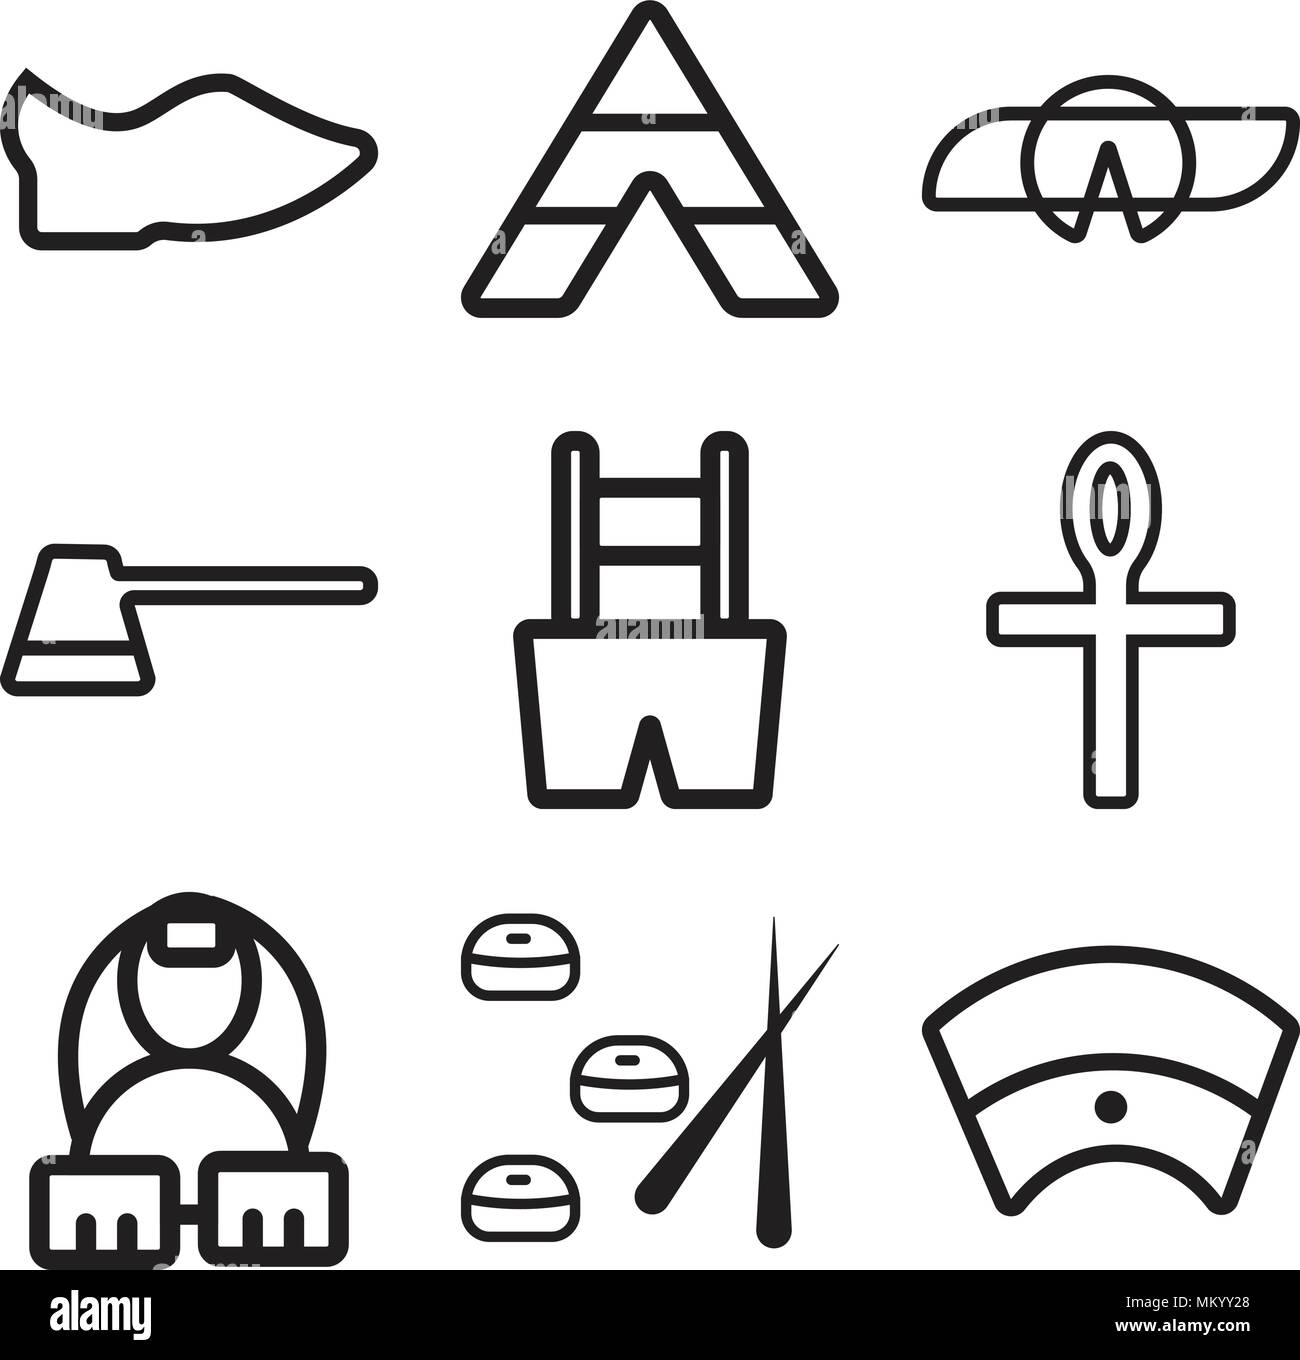 Set Of 9 simple editable icons such as Egyptian, Sushi, Ankh, Trousers, Coffee, Fortune cookie, Tipi, Clog, can be used for mobile, web Stock Vector